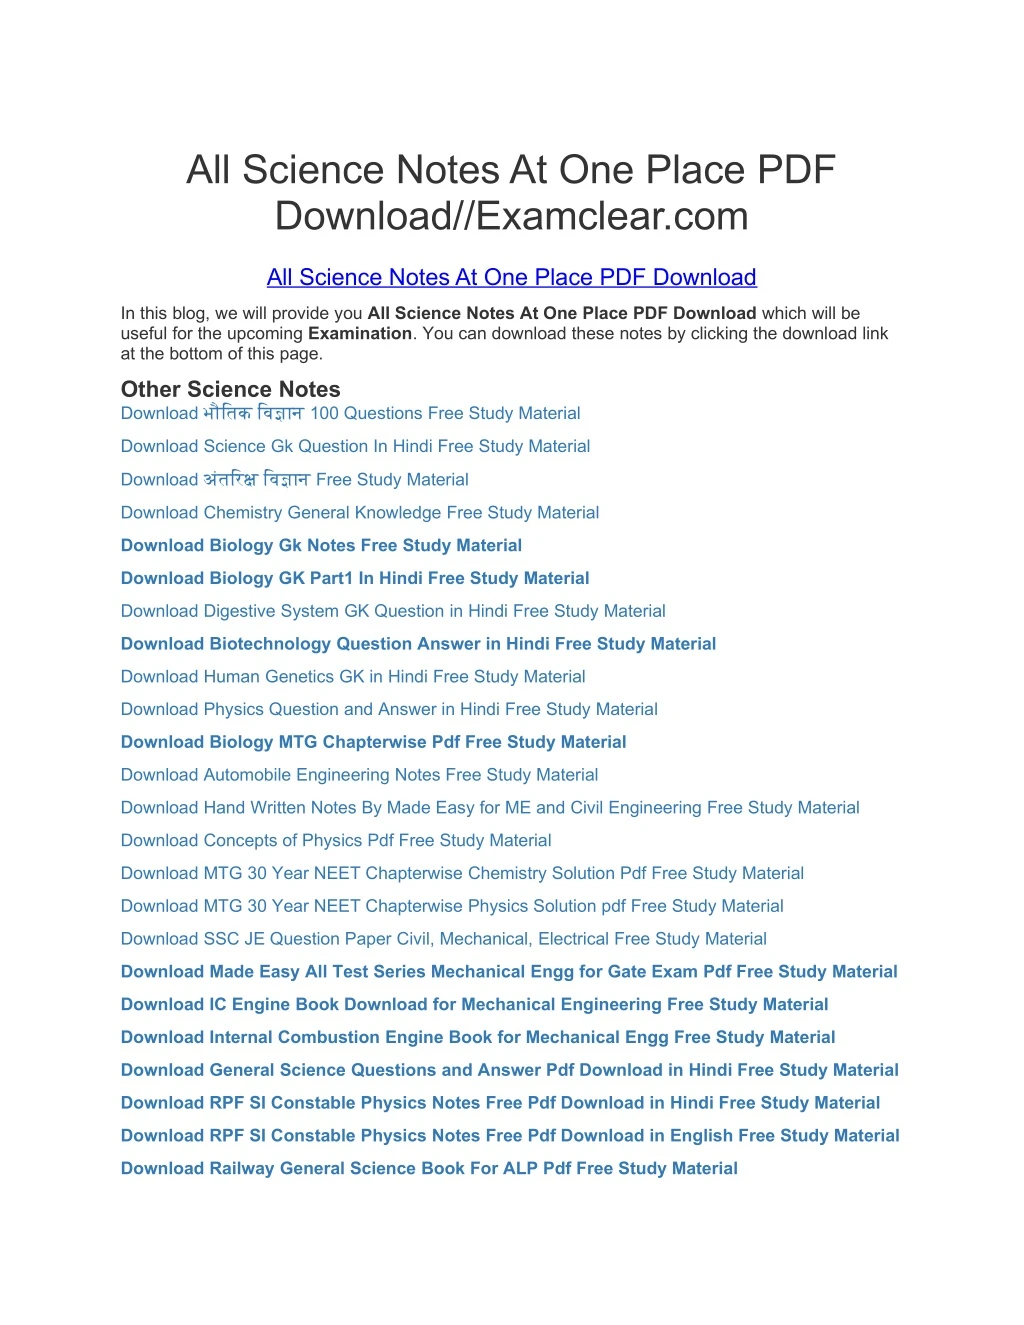 all science notes at one place pdf download